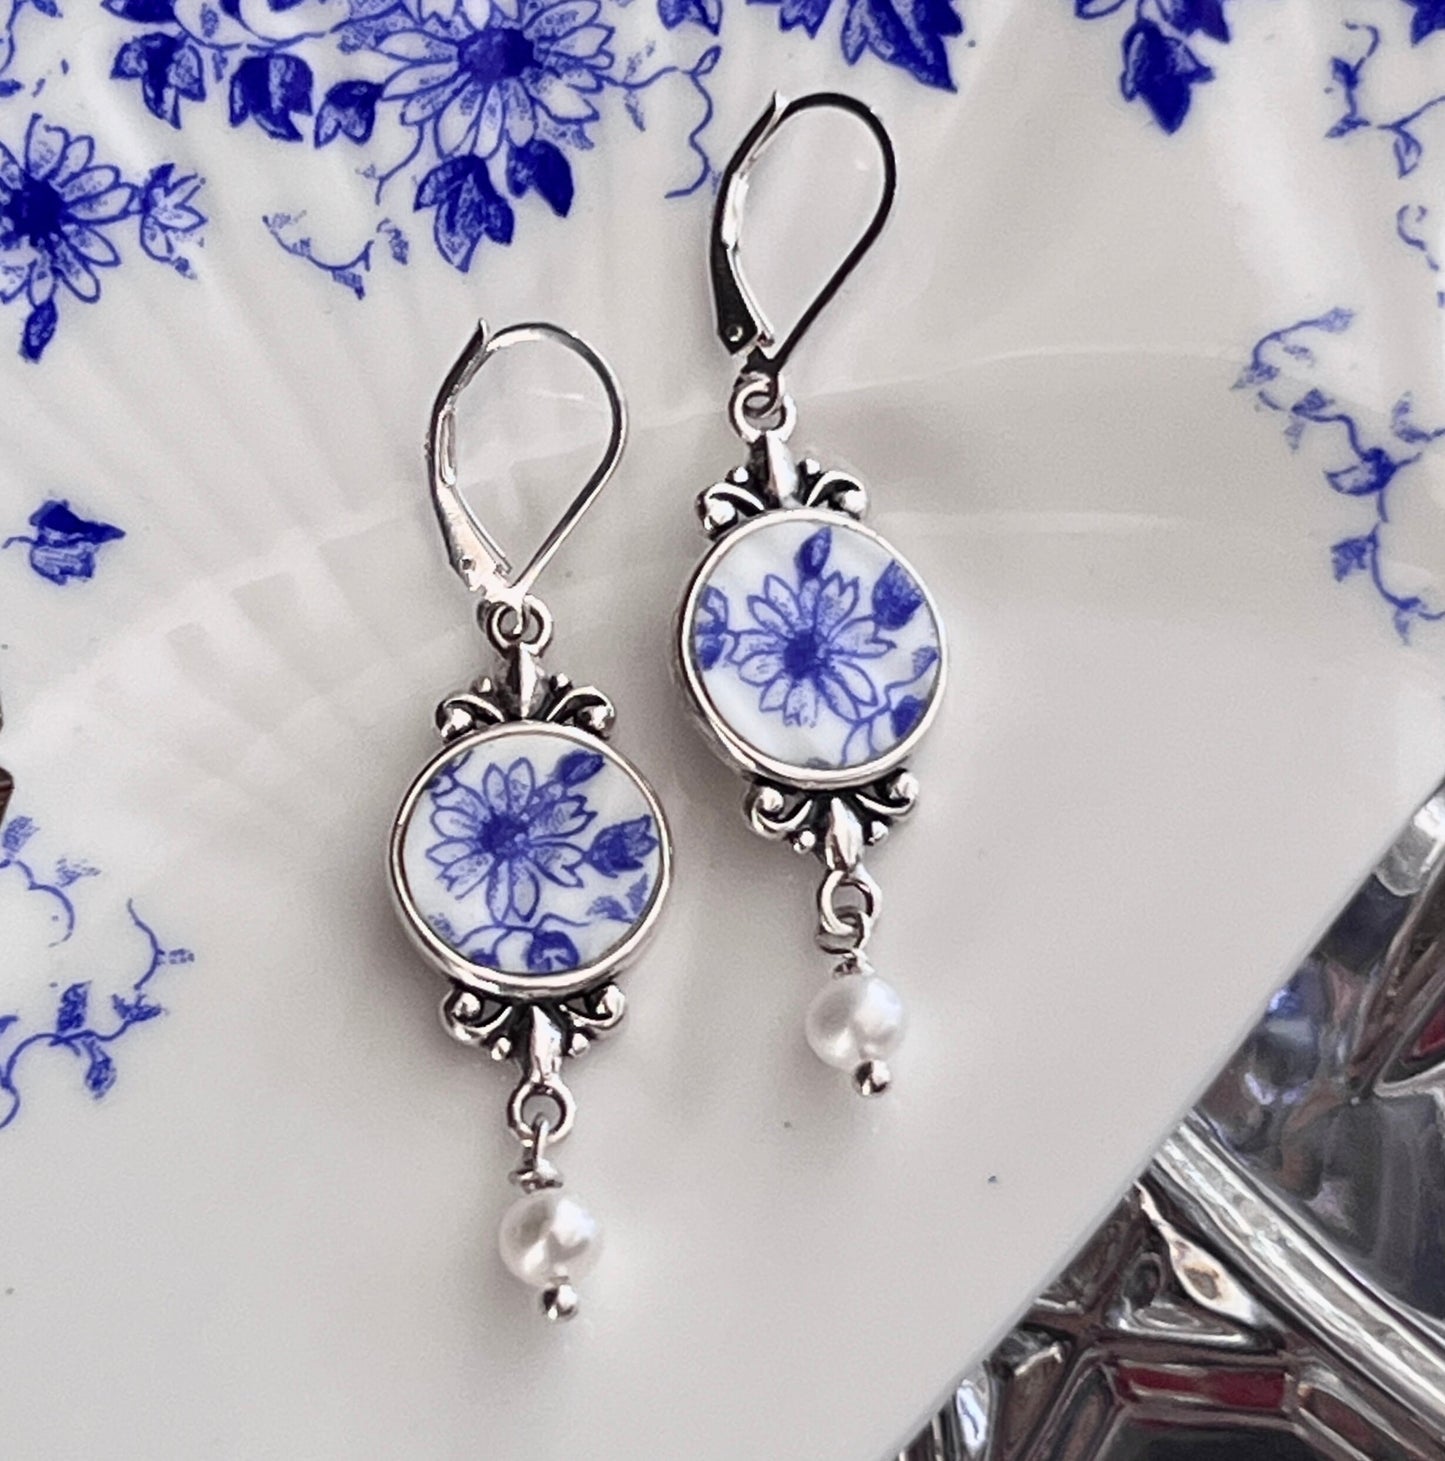 20th Anniversary Gift for Wife, Shelley Dainty Blue, Victorian Broken China Jewelry Earrings